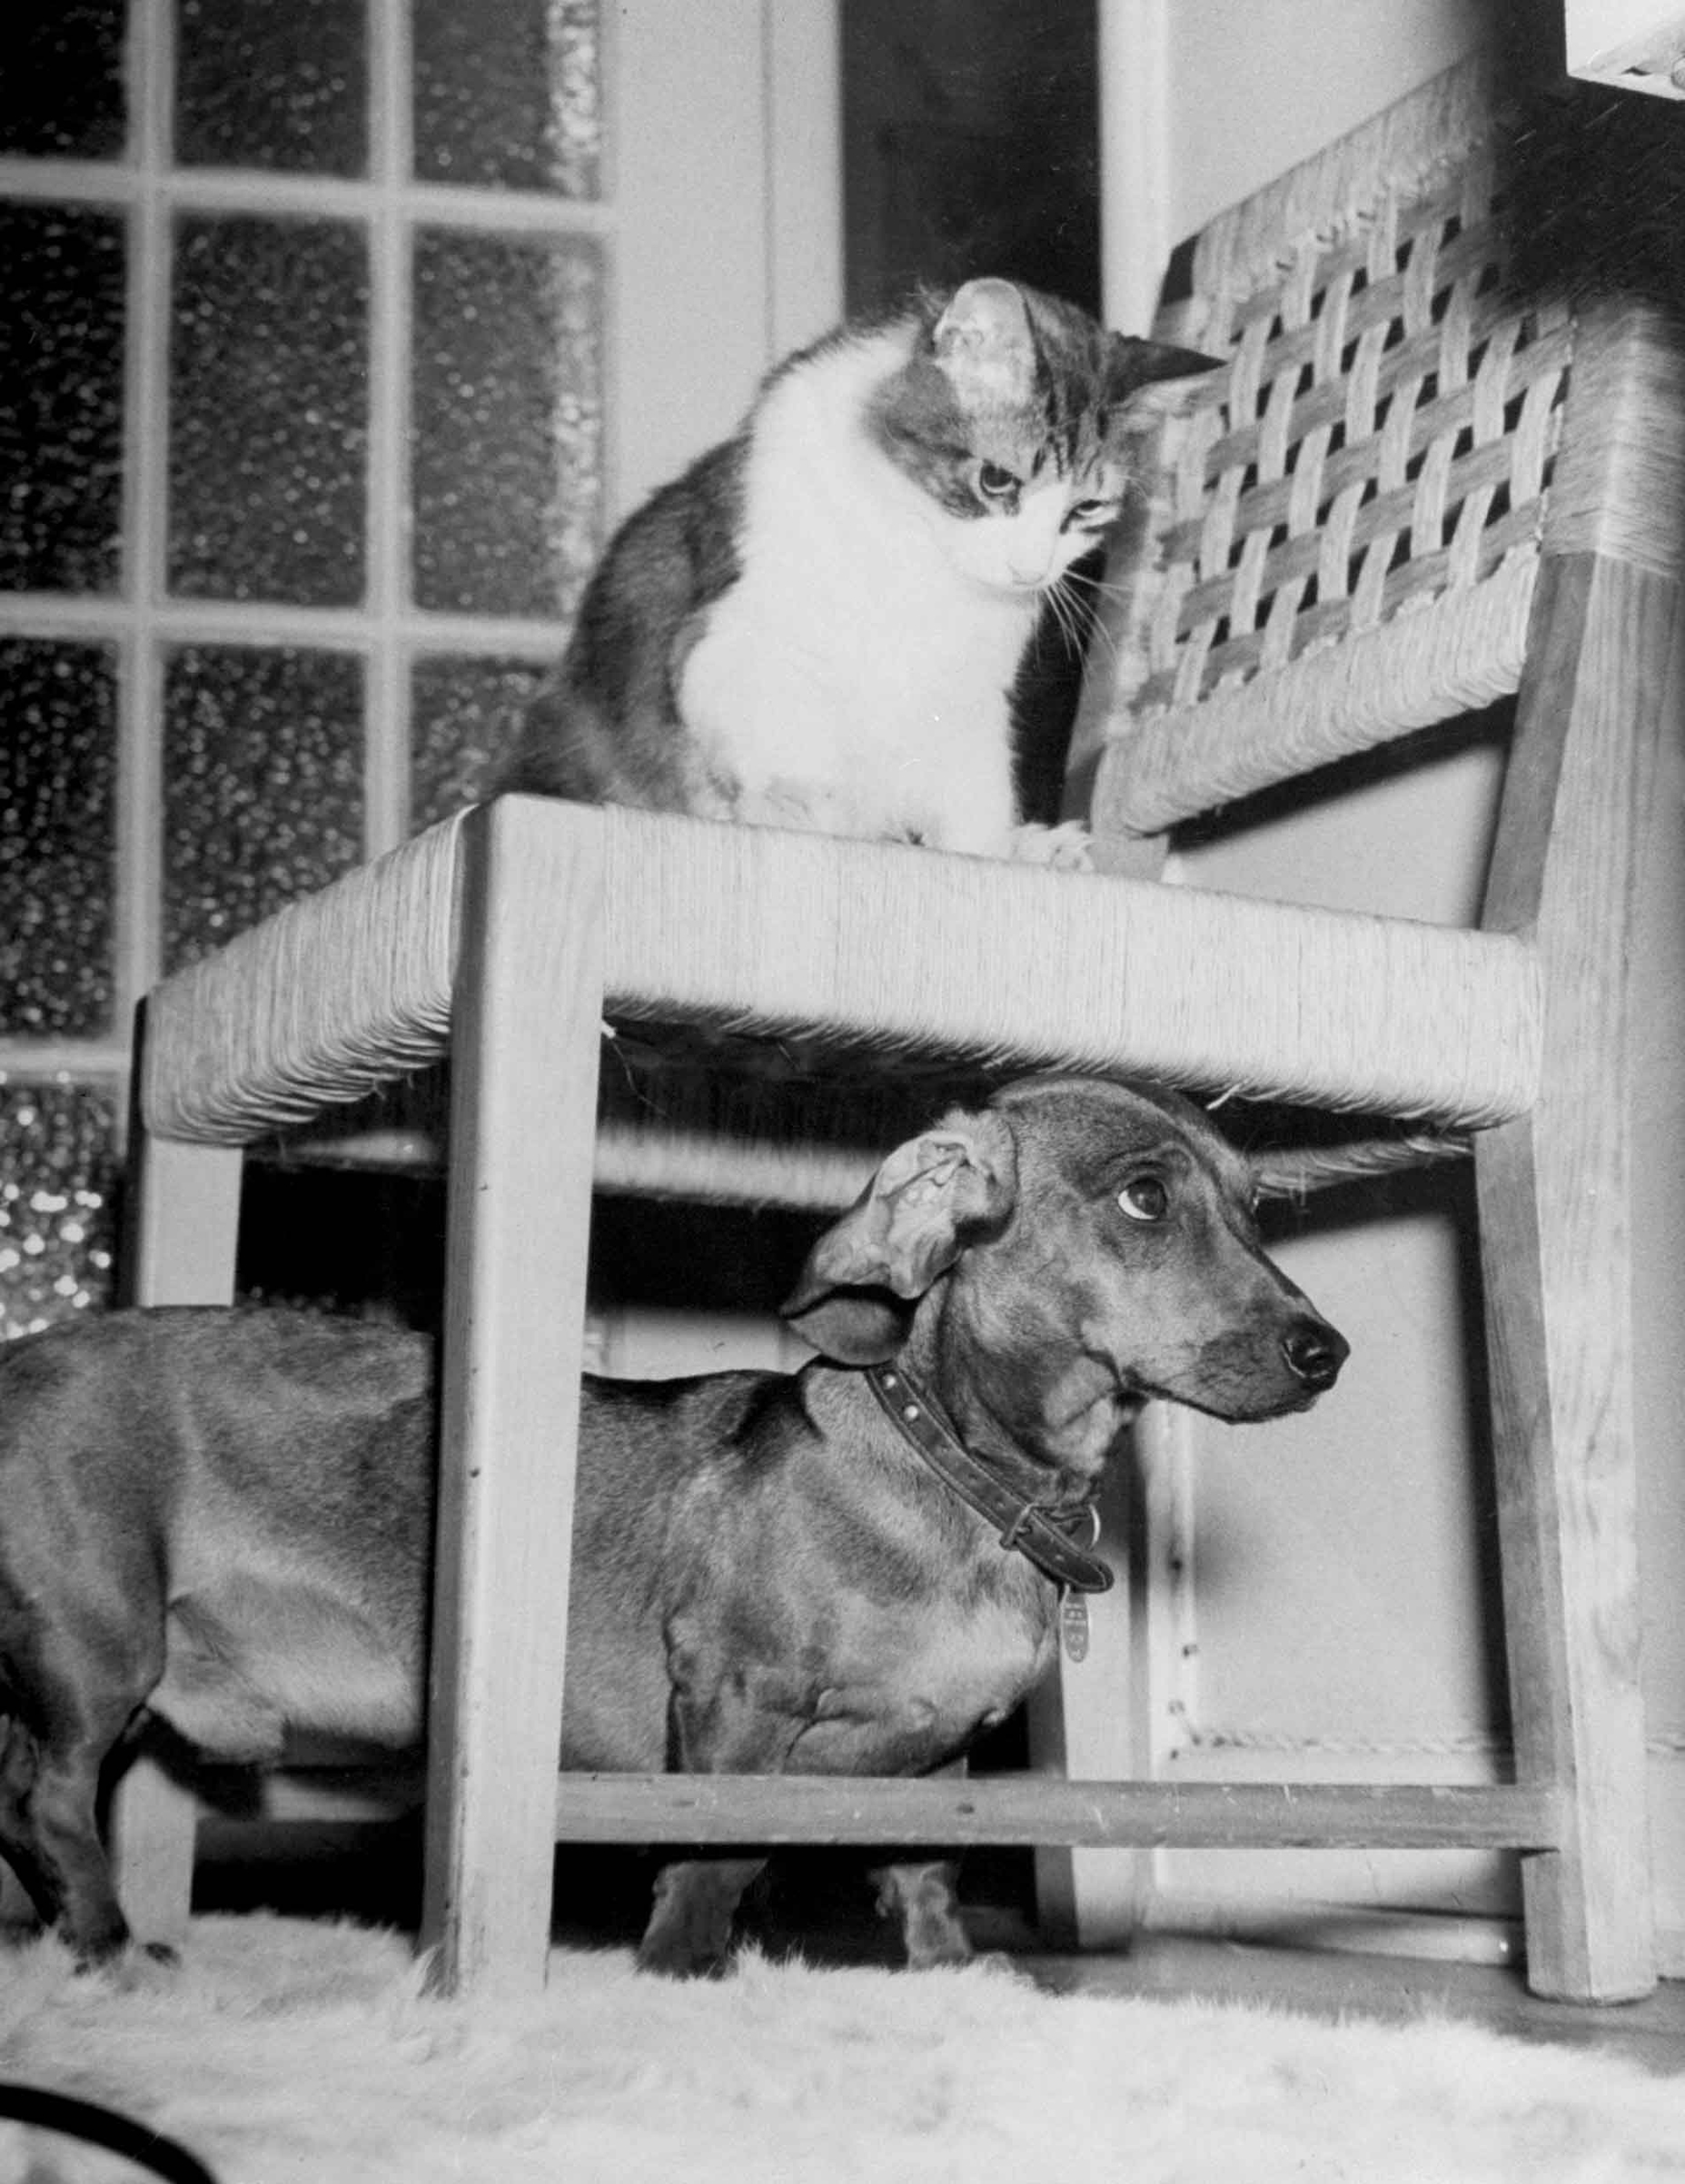 Rudy the Dachshund and Trudy the cat engaged in hide and seek or"pounce on the dog" in prelude to friendly roughhousing wrestling match between the pet housemates. 1946.